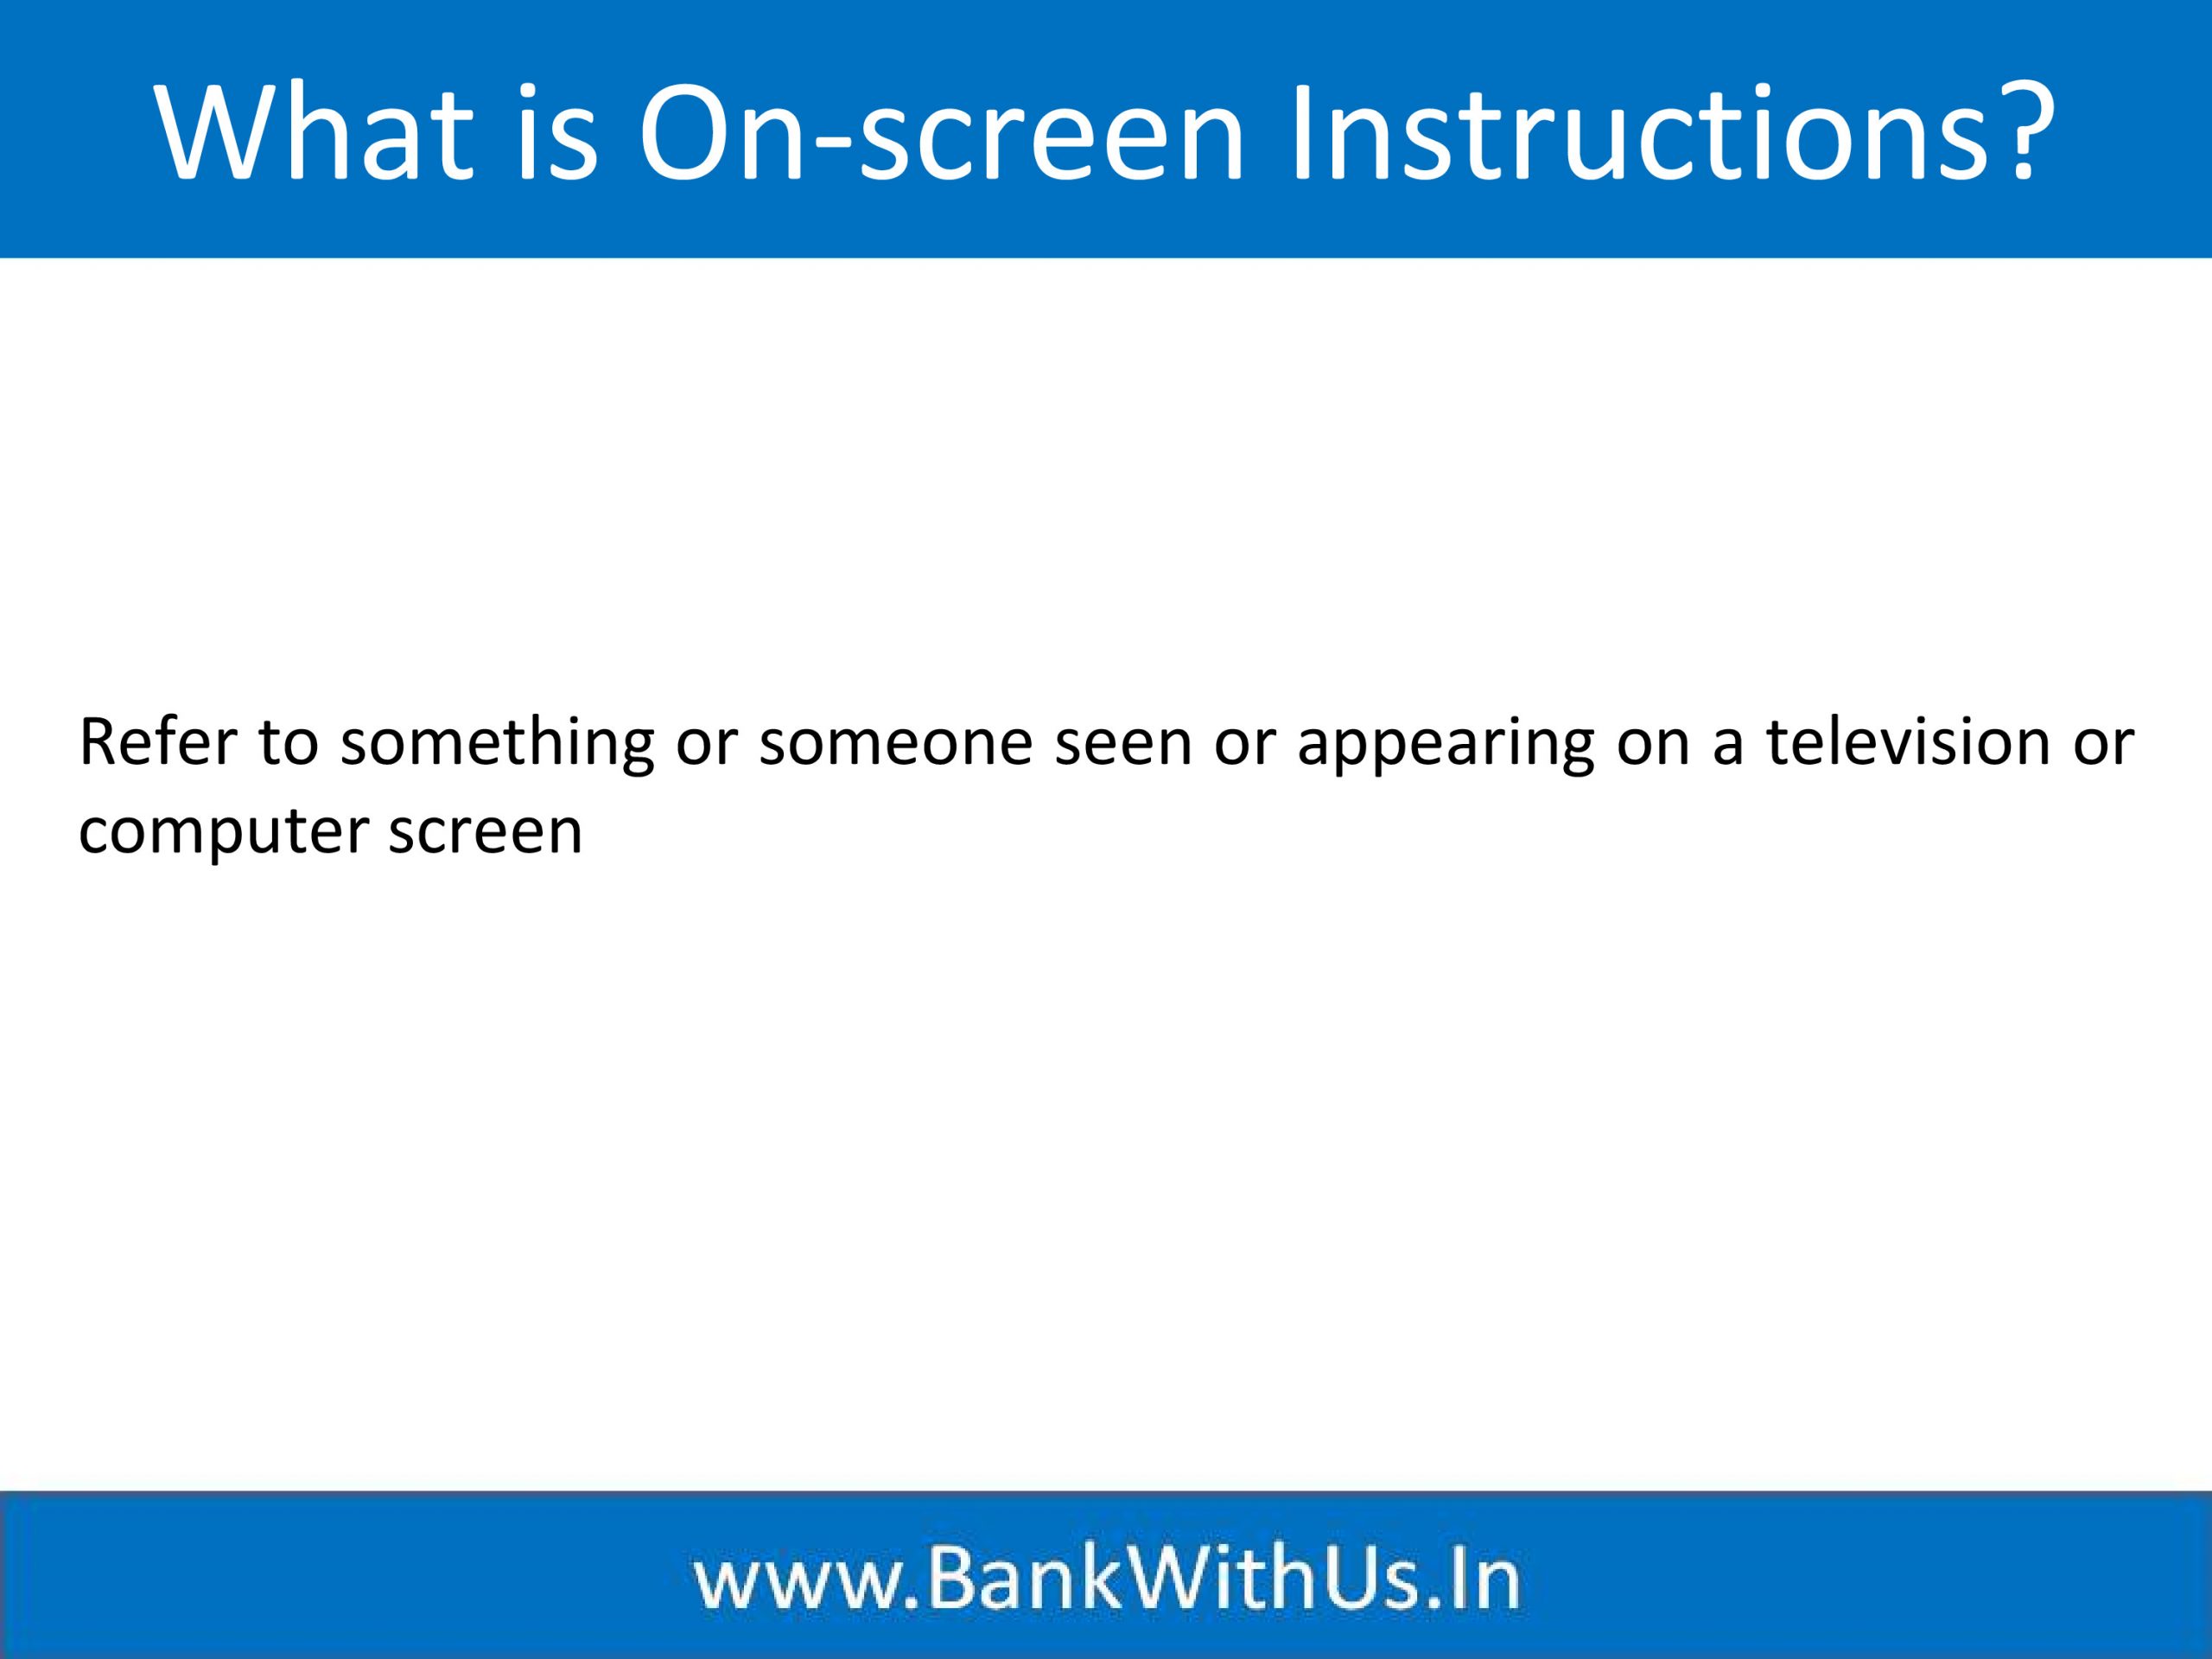 Follow the on-screen instructions